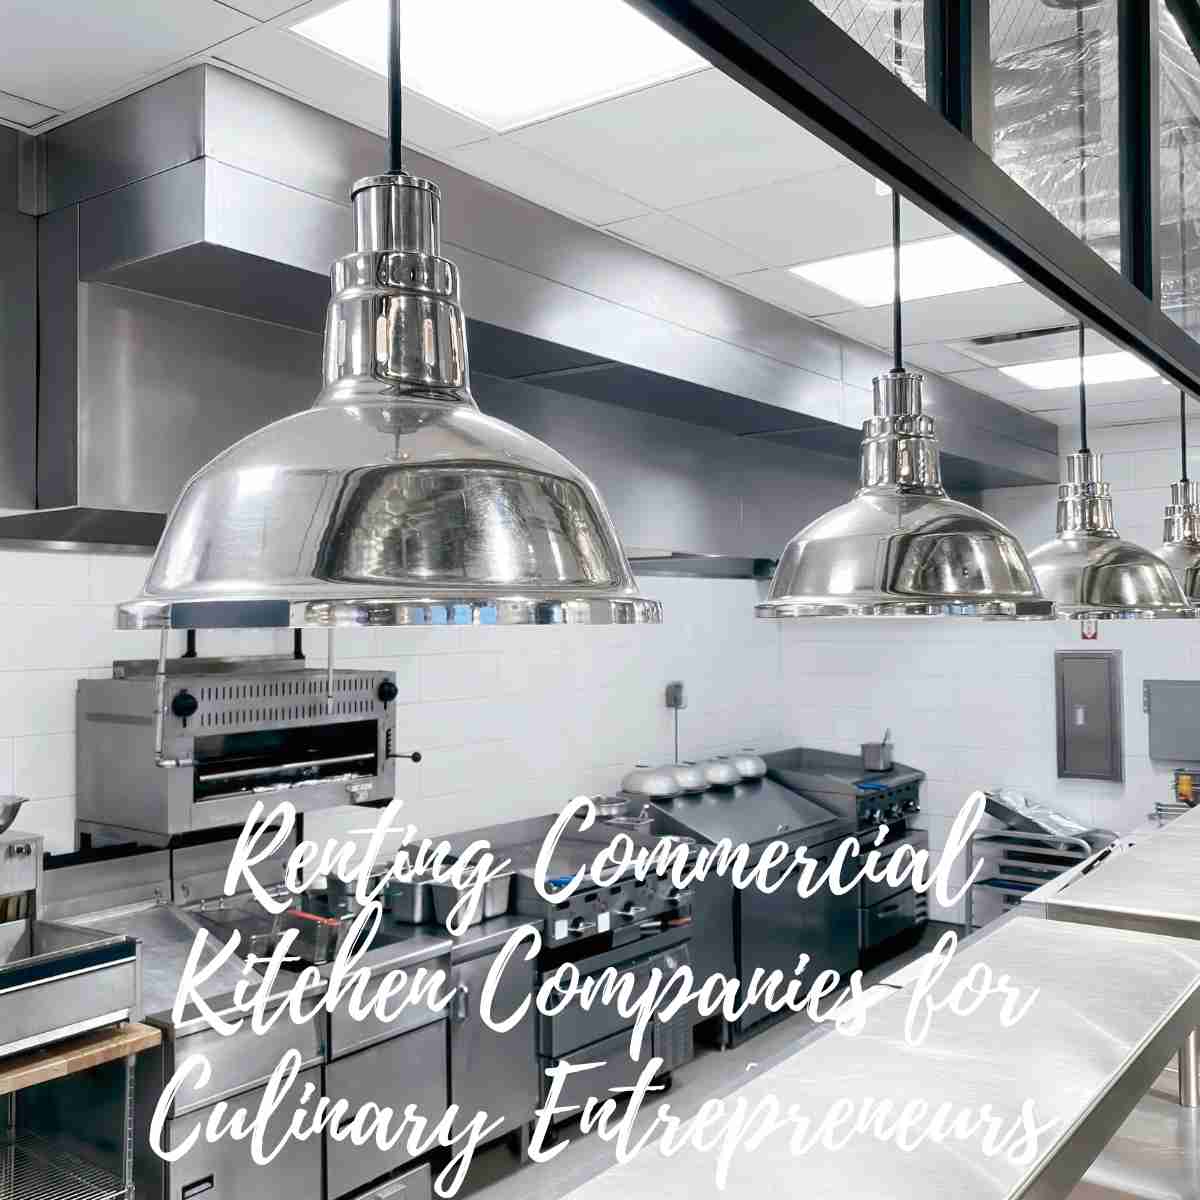 Renting Commercial Kitchen Companies for Culinary Entrepreneurs